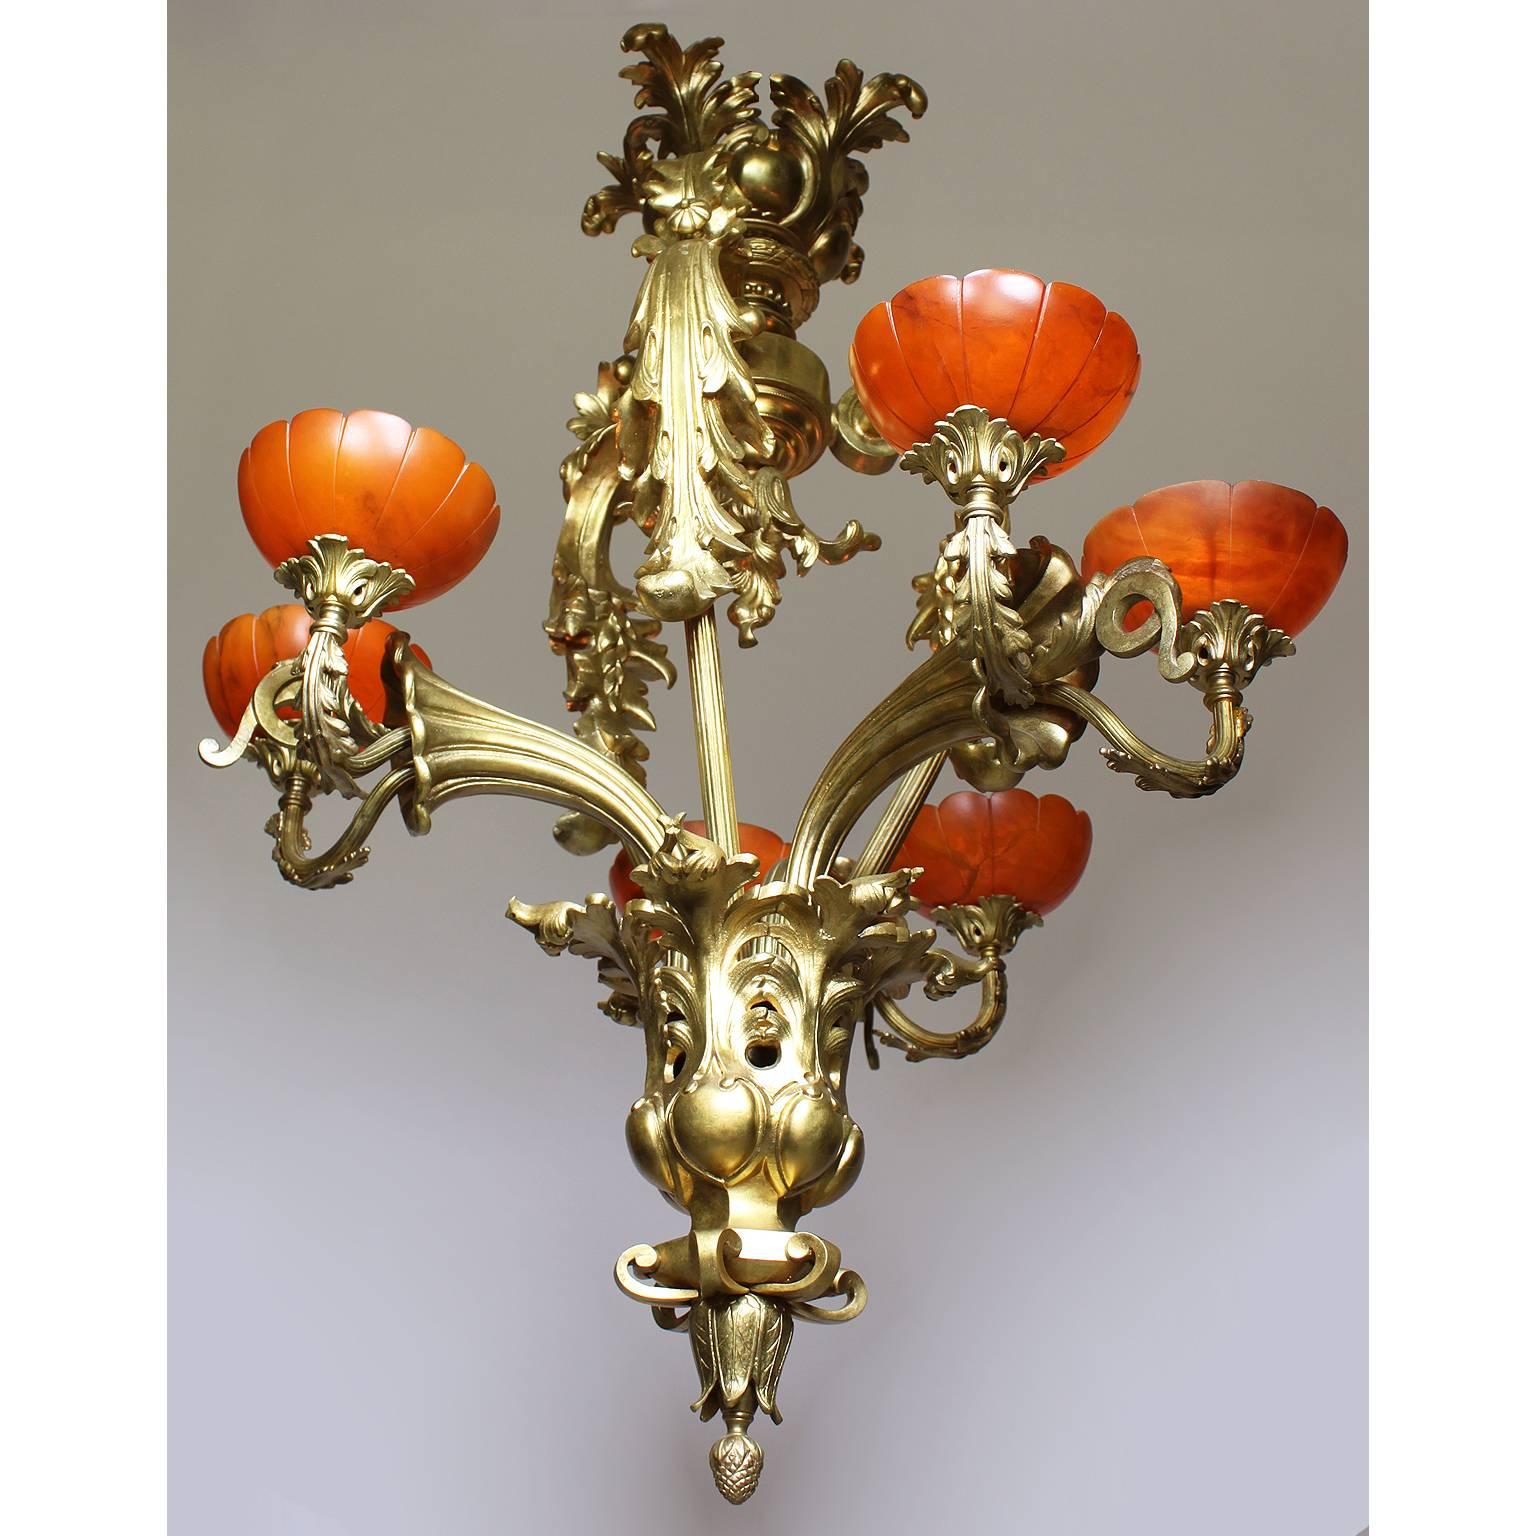 French Belle Époque Early 20th Century Gilt-Bronze & Alabaster Lilies Chandelier For Sale 2